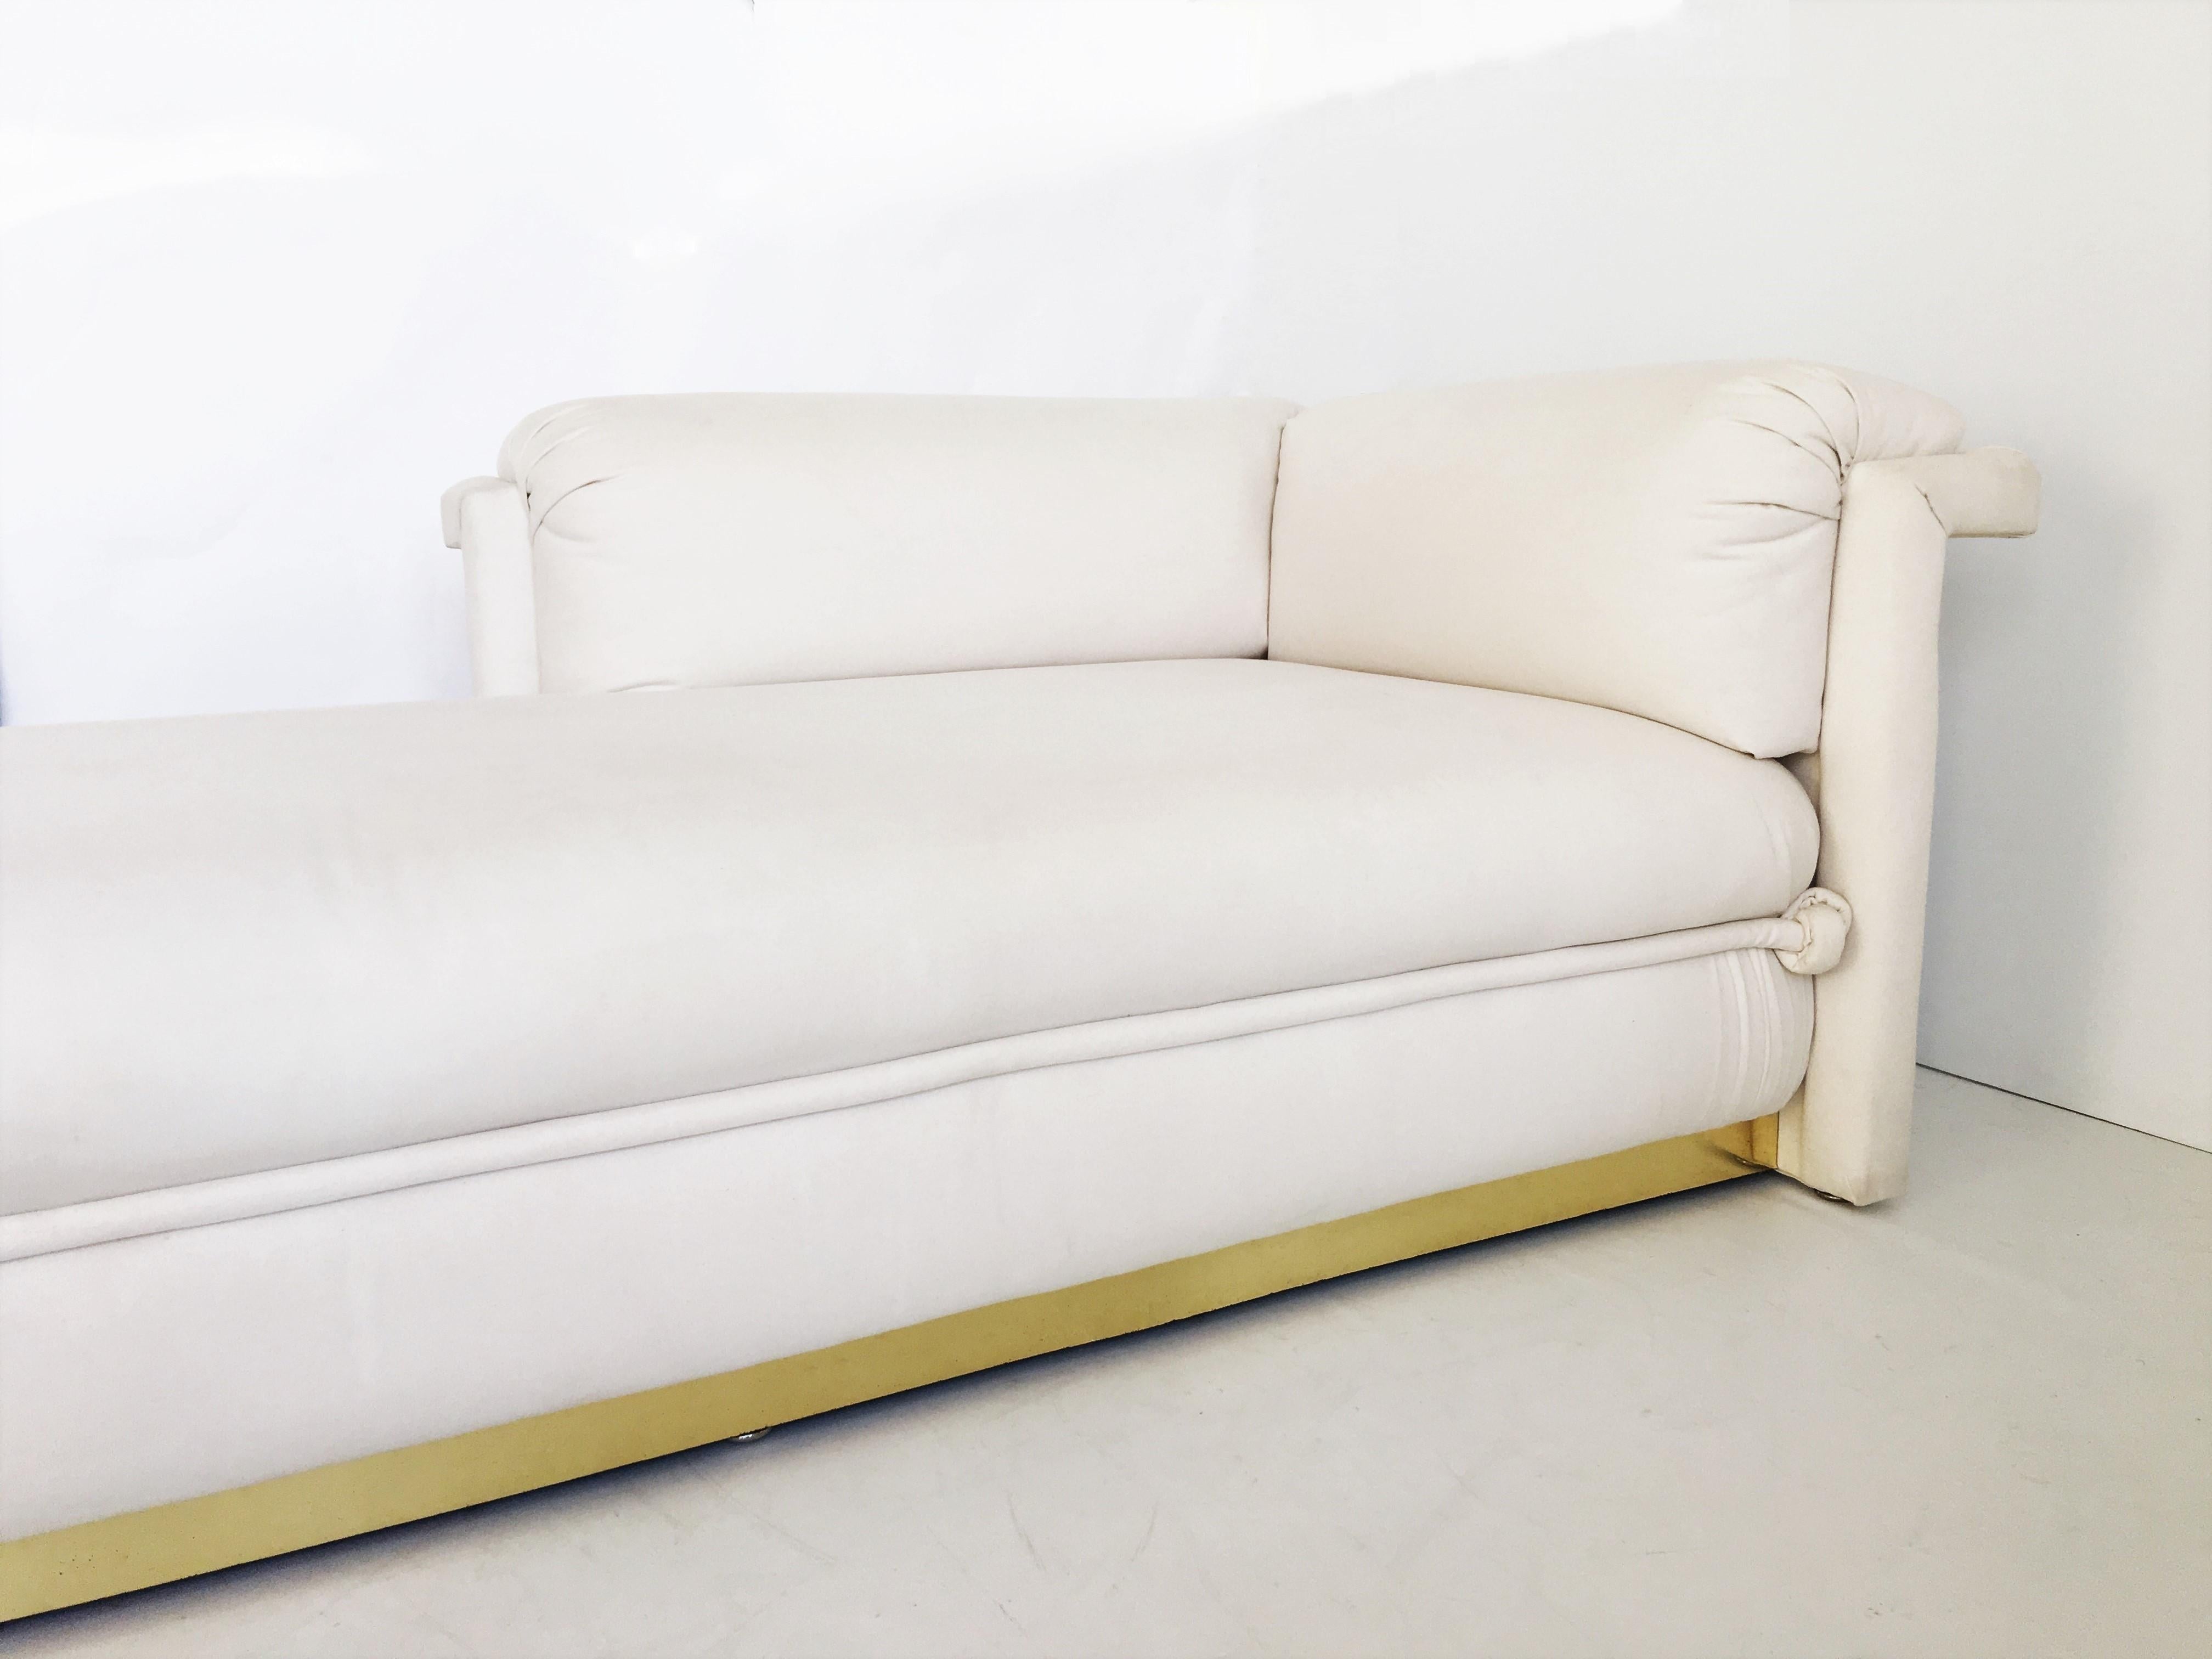 20th Century French Art Deco Chaise Longue with Brass Base For Sale